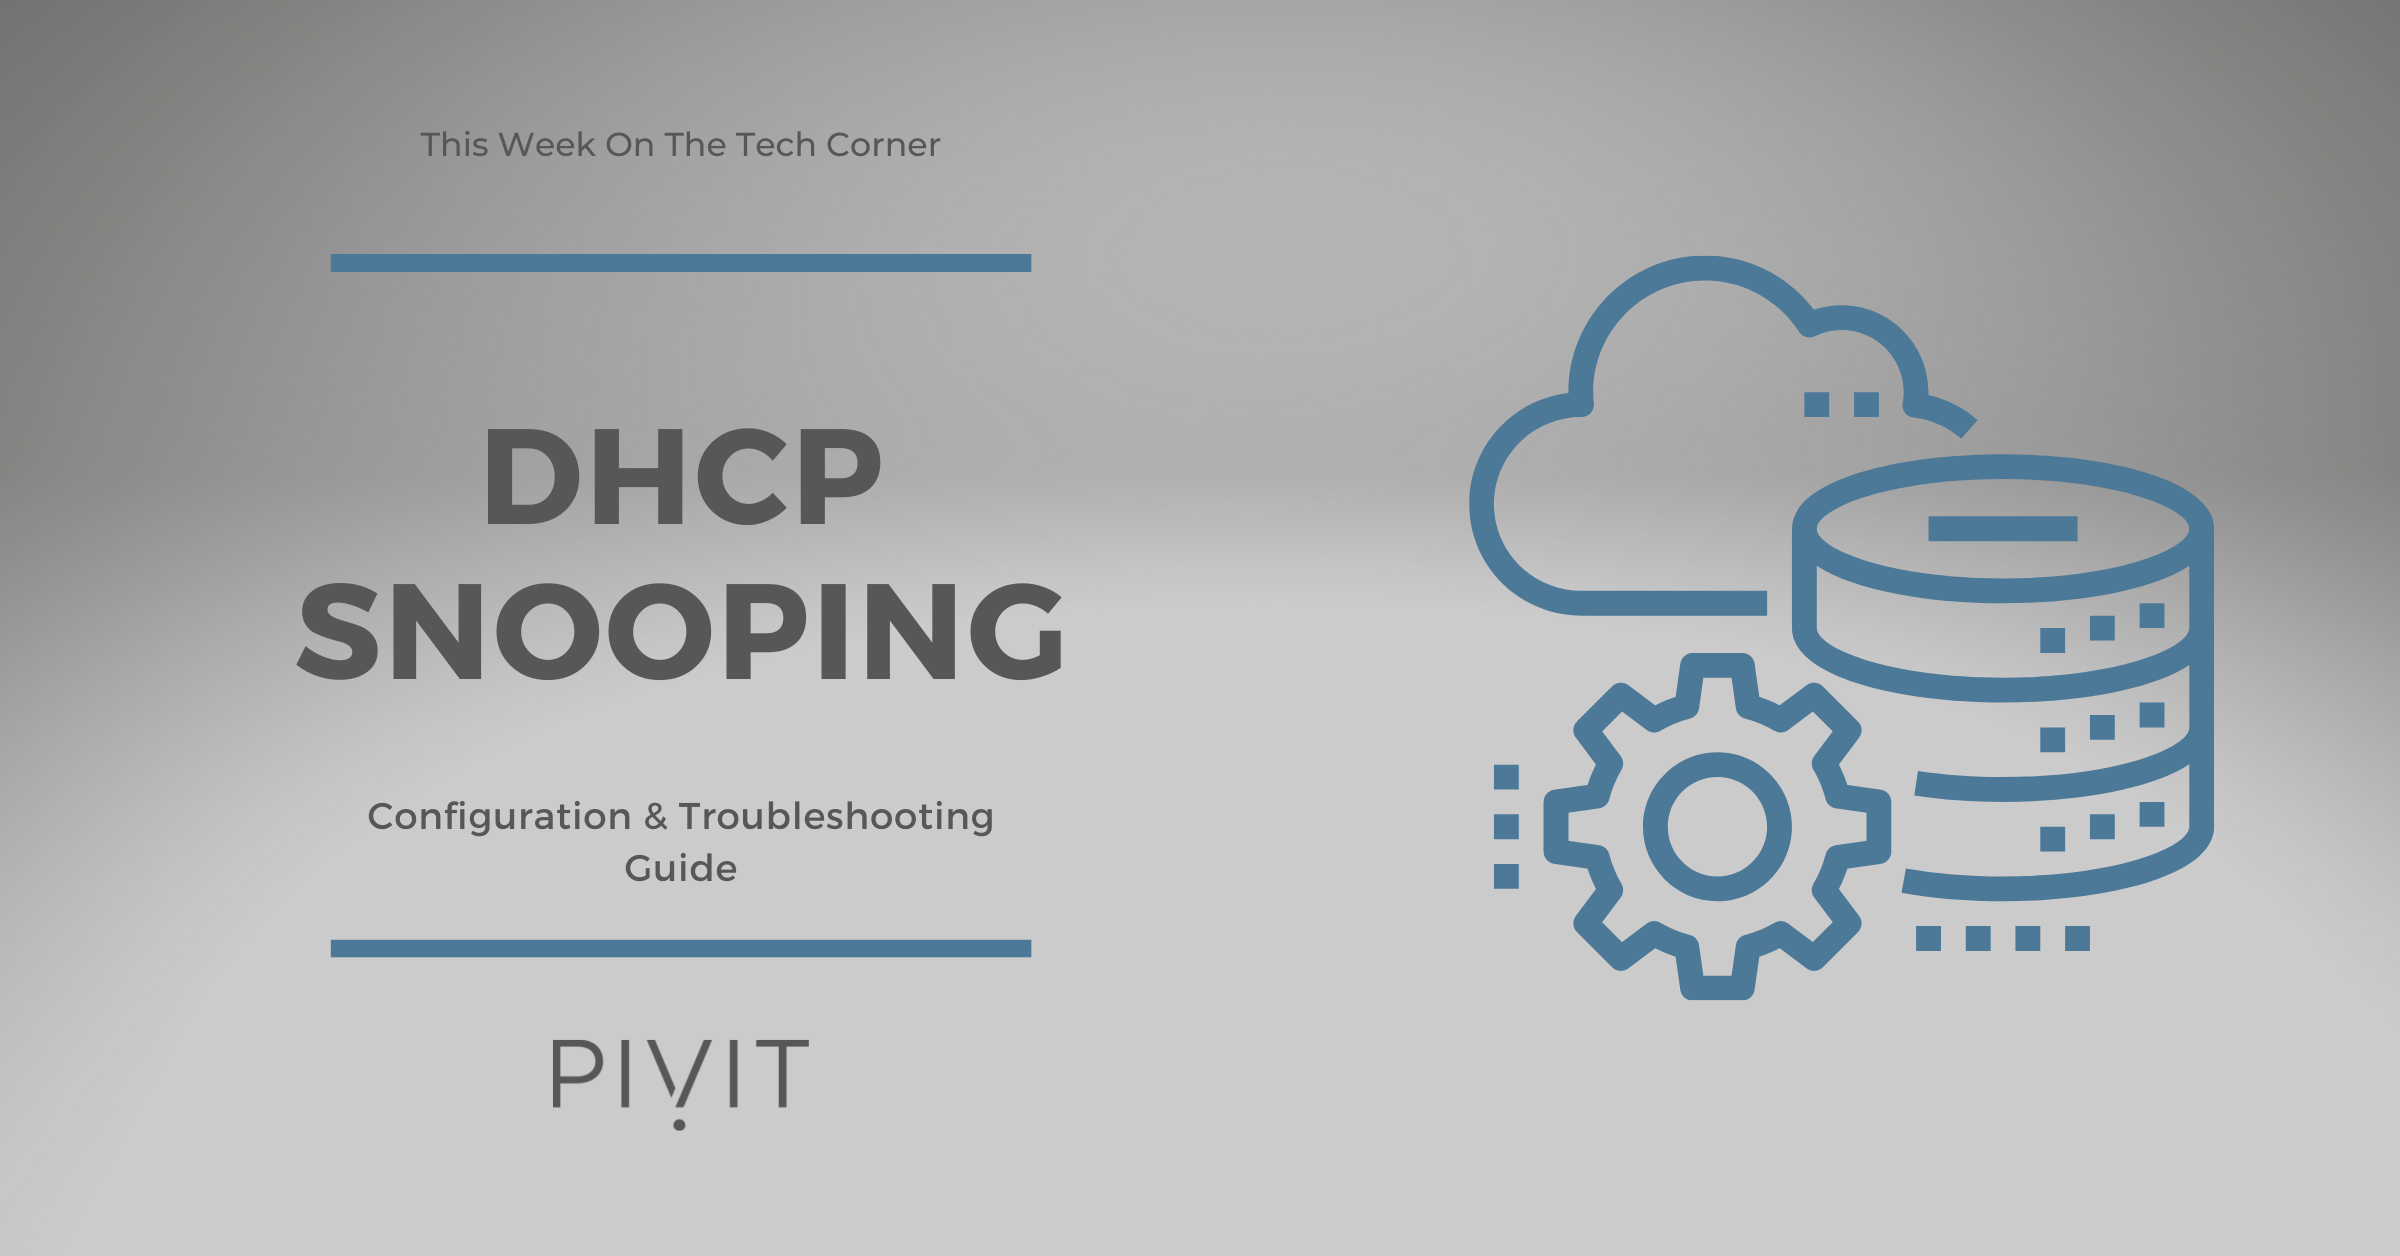 dhcp snooping configuration guide for troubleshooting